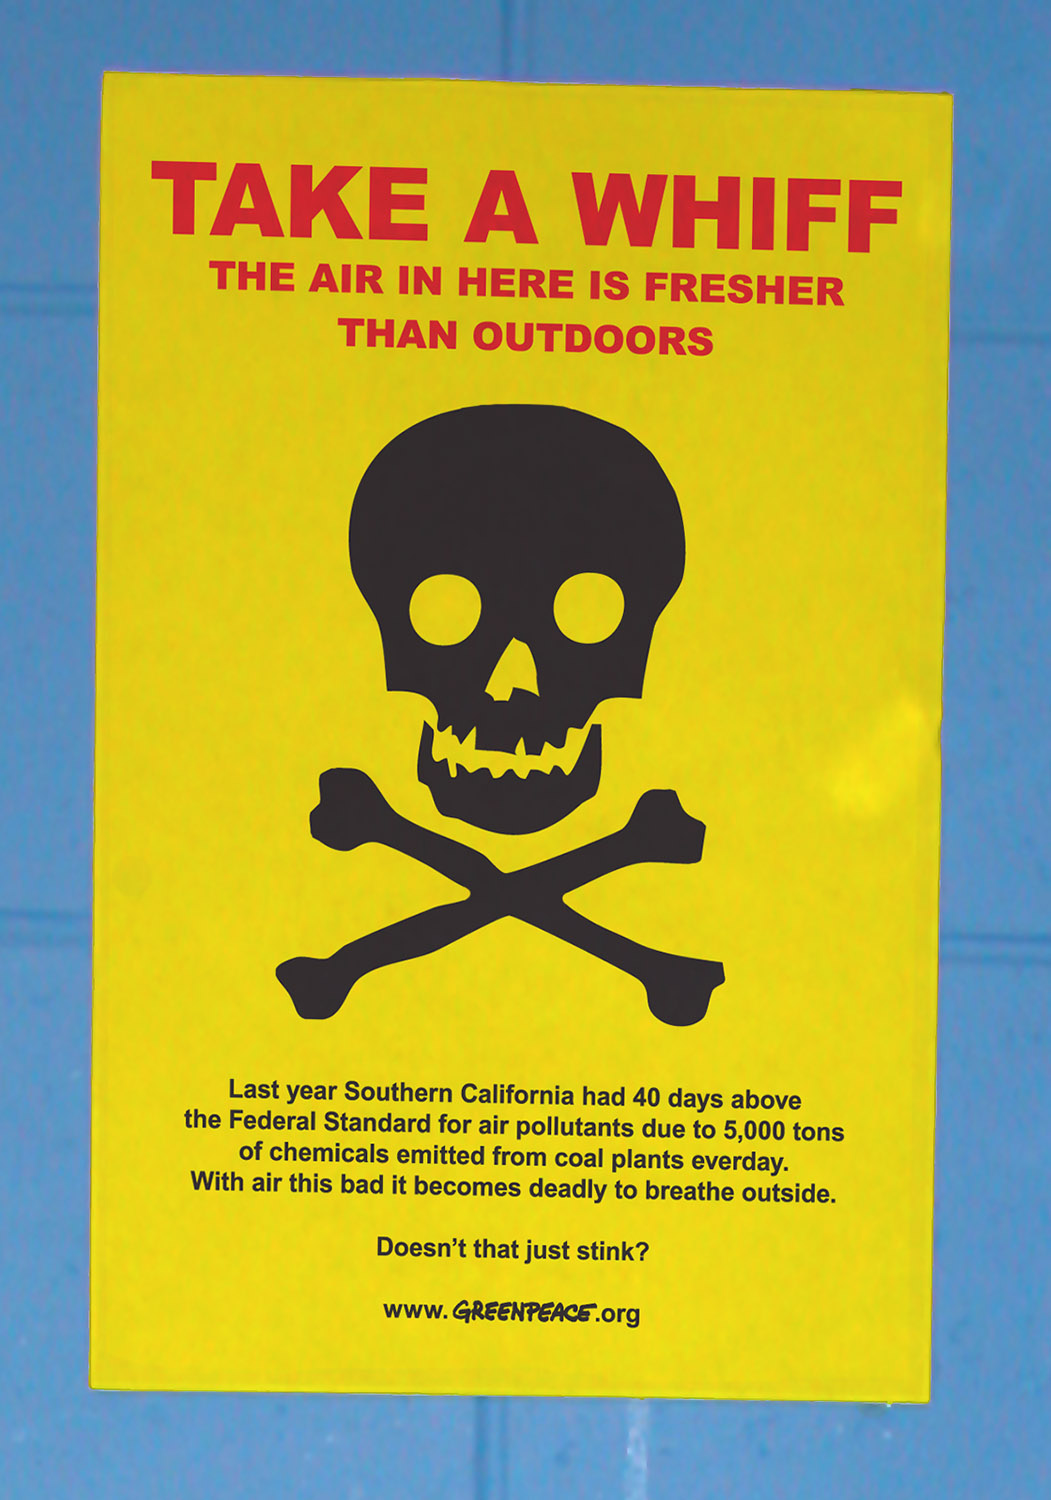 Greenpeace Ad Campaign Targeting Smog in California - Bathroom poster